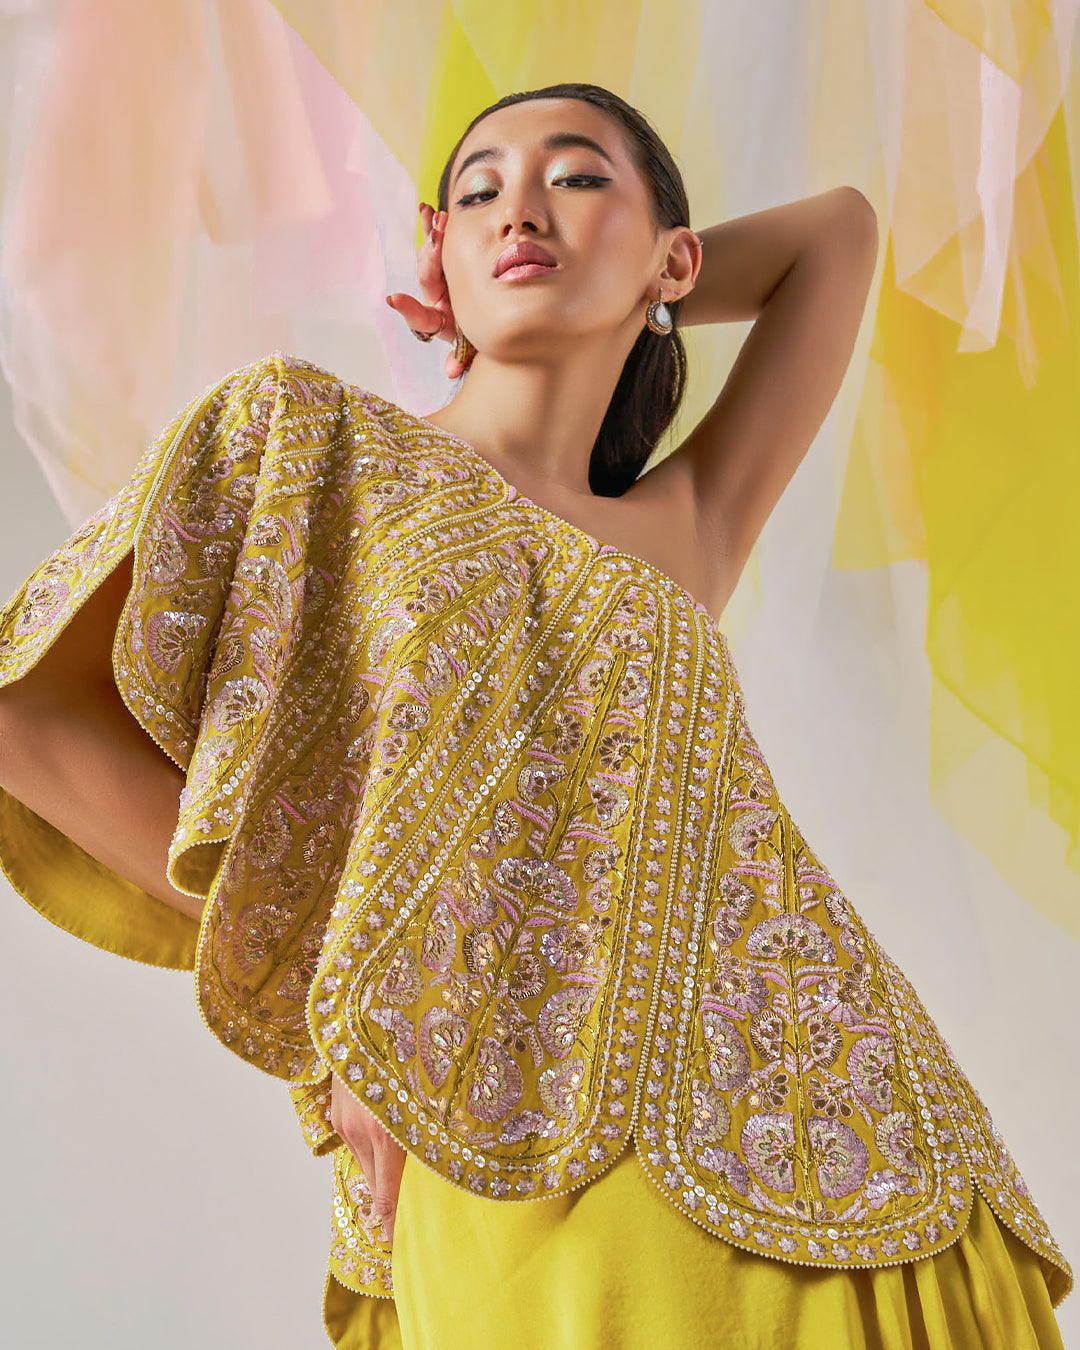 Regal Petal-Inspired One-Shoulder Top: Paired with Ochre Yellow Stretch Satin Tulip Skirt